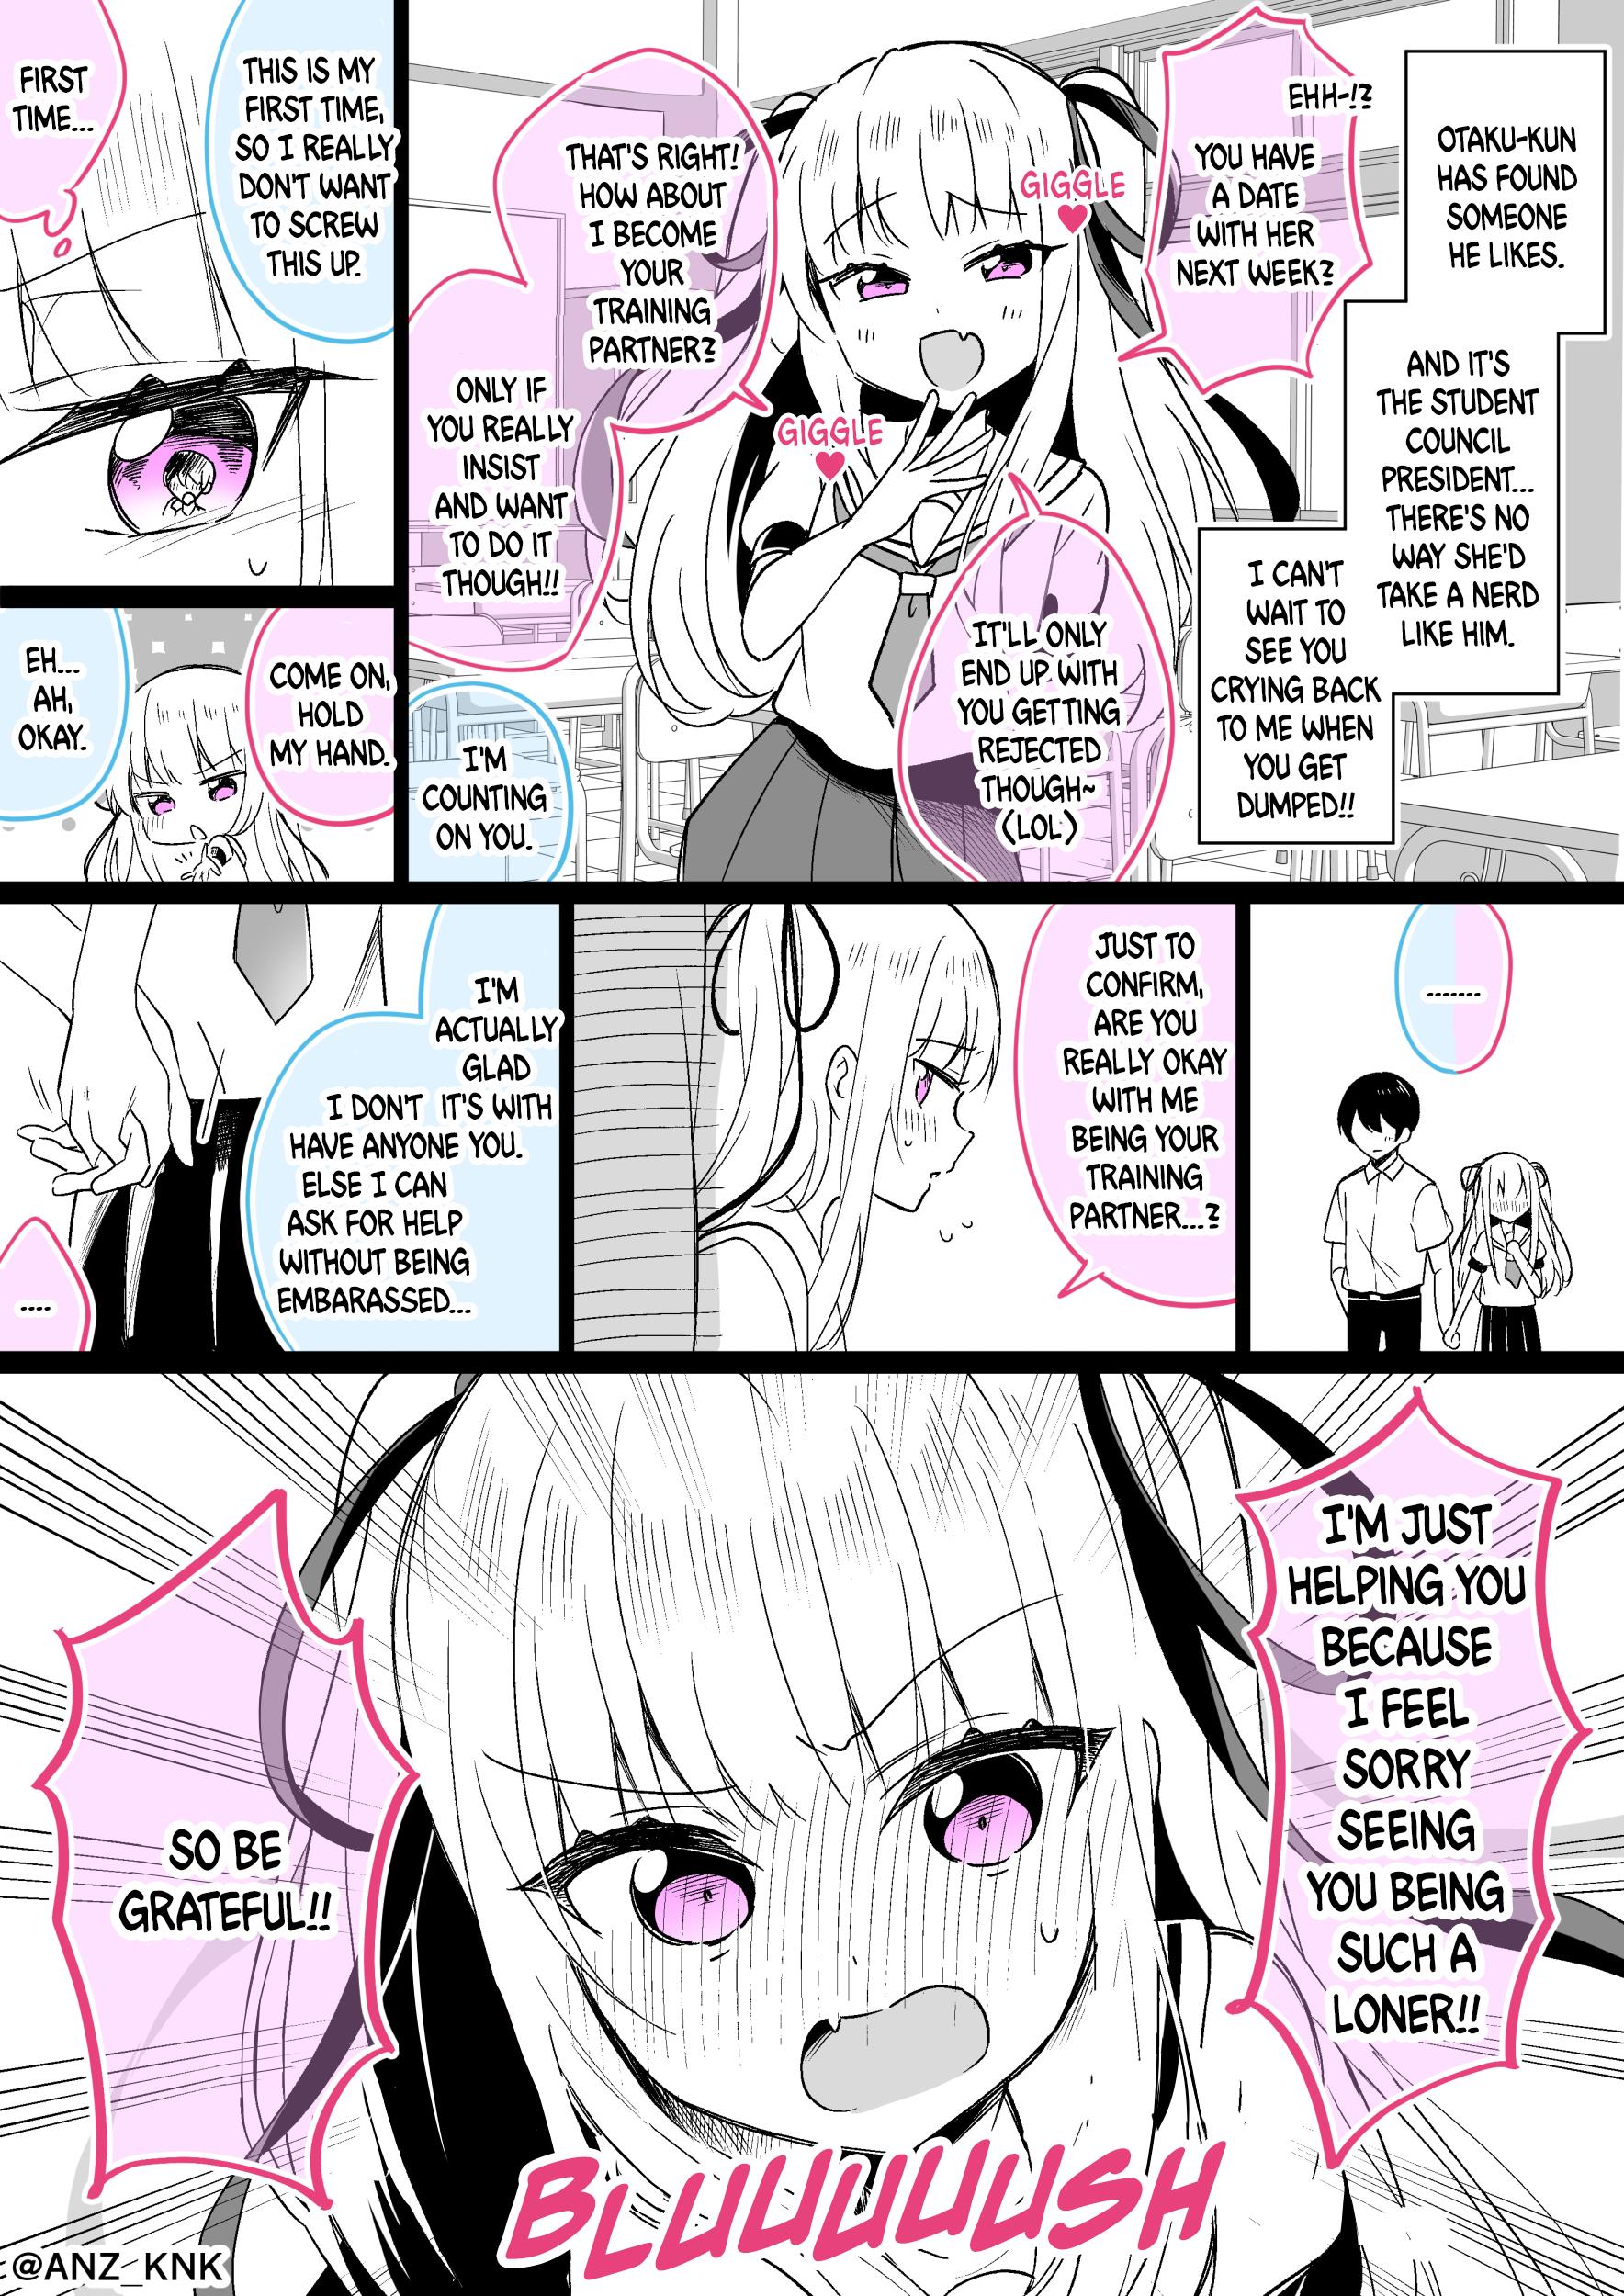 Setting Things Straight With Brats - Page 1